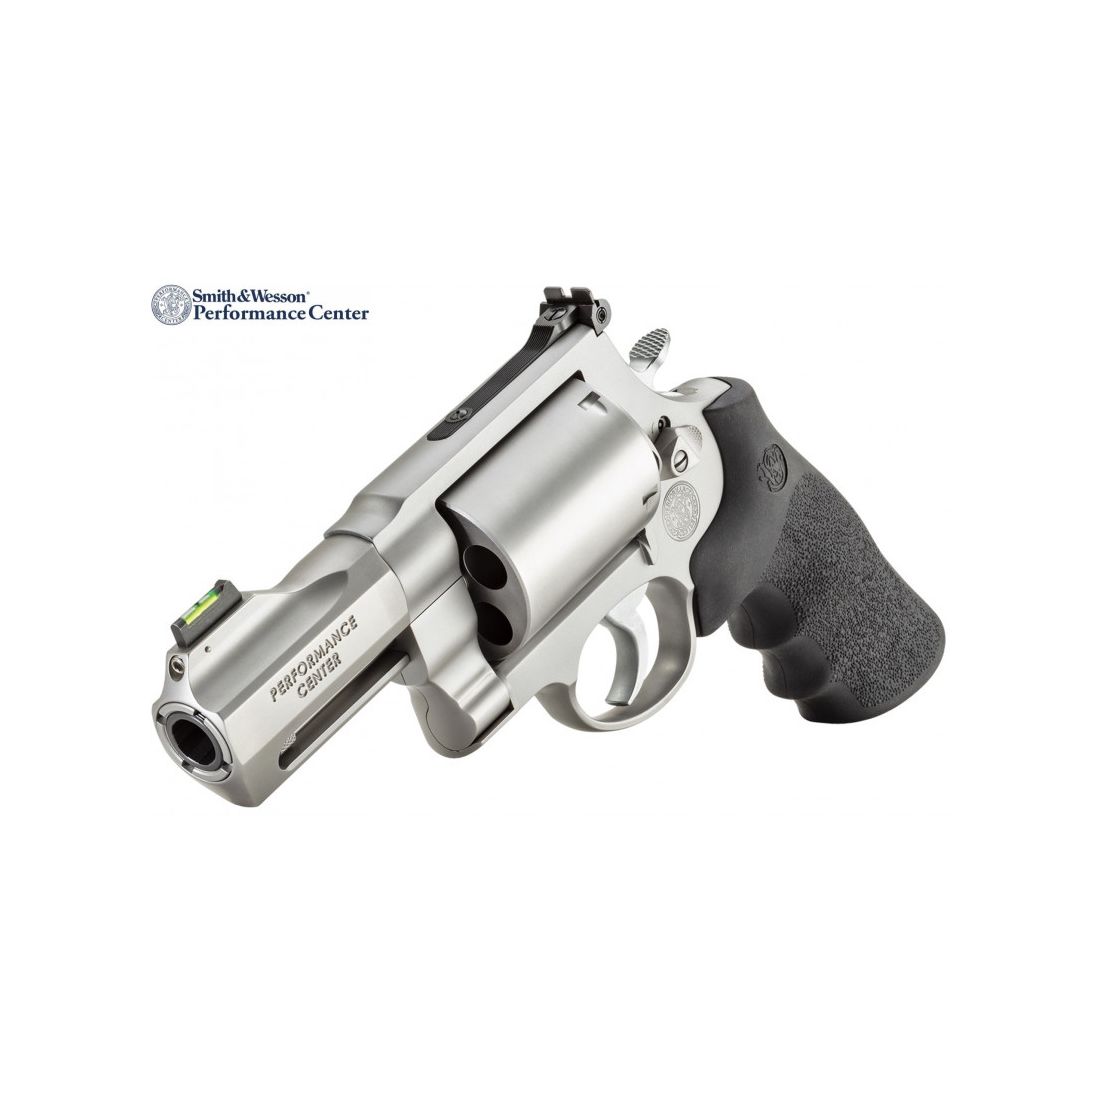 Smith & Wesson Model 500 Performance Center 3,5 Zoll